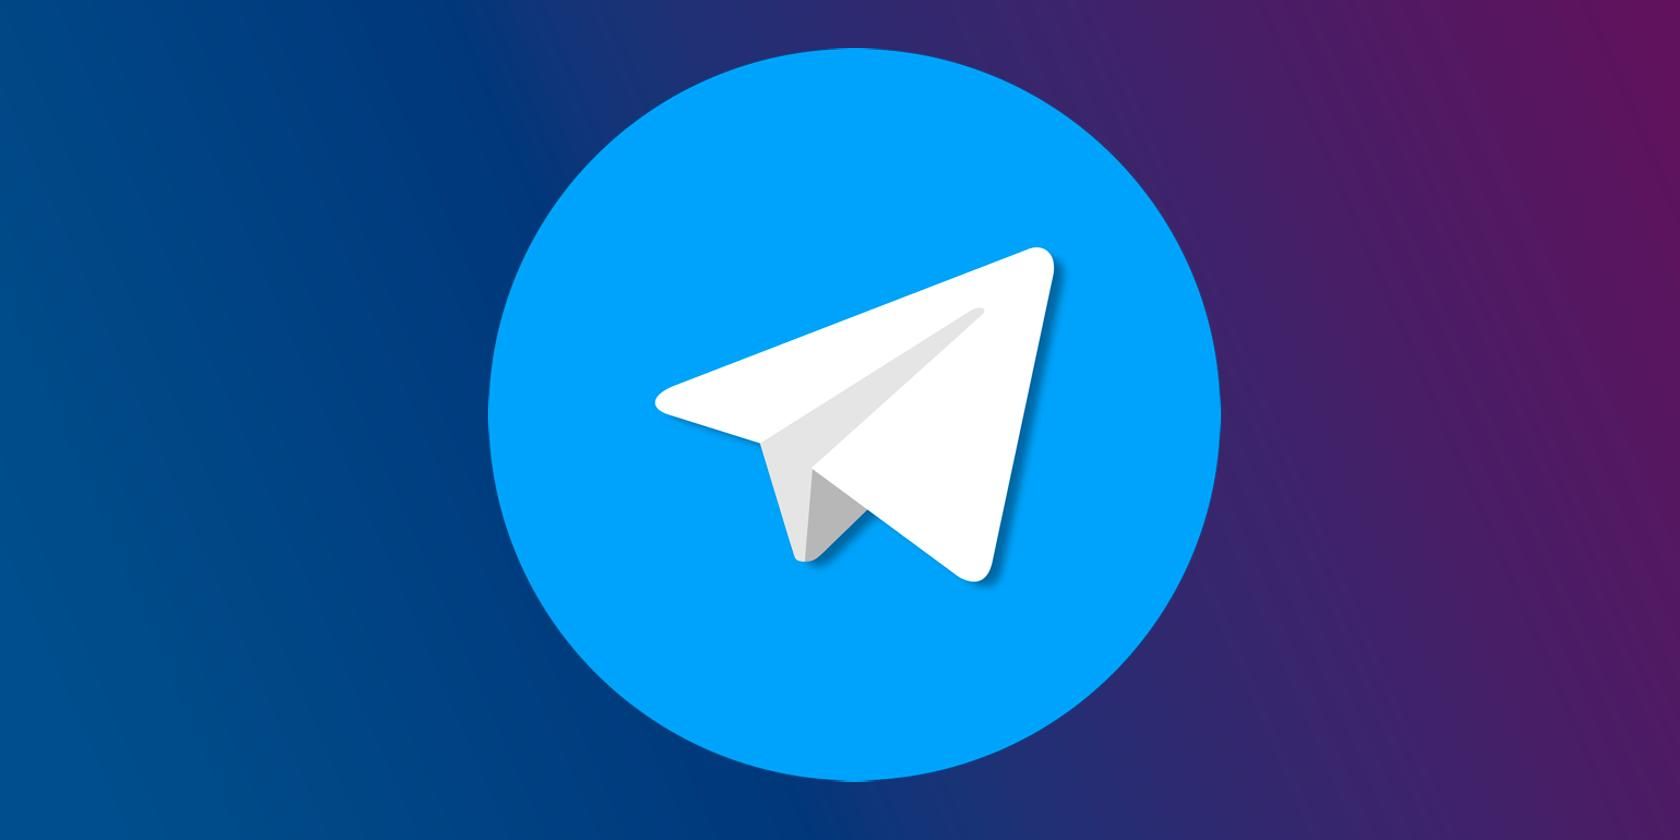 Picture of the Telegram logo on a purple/blue background